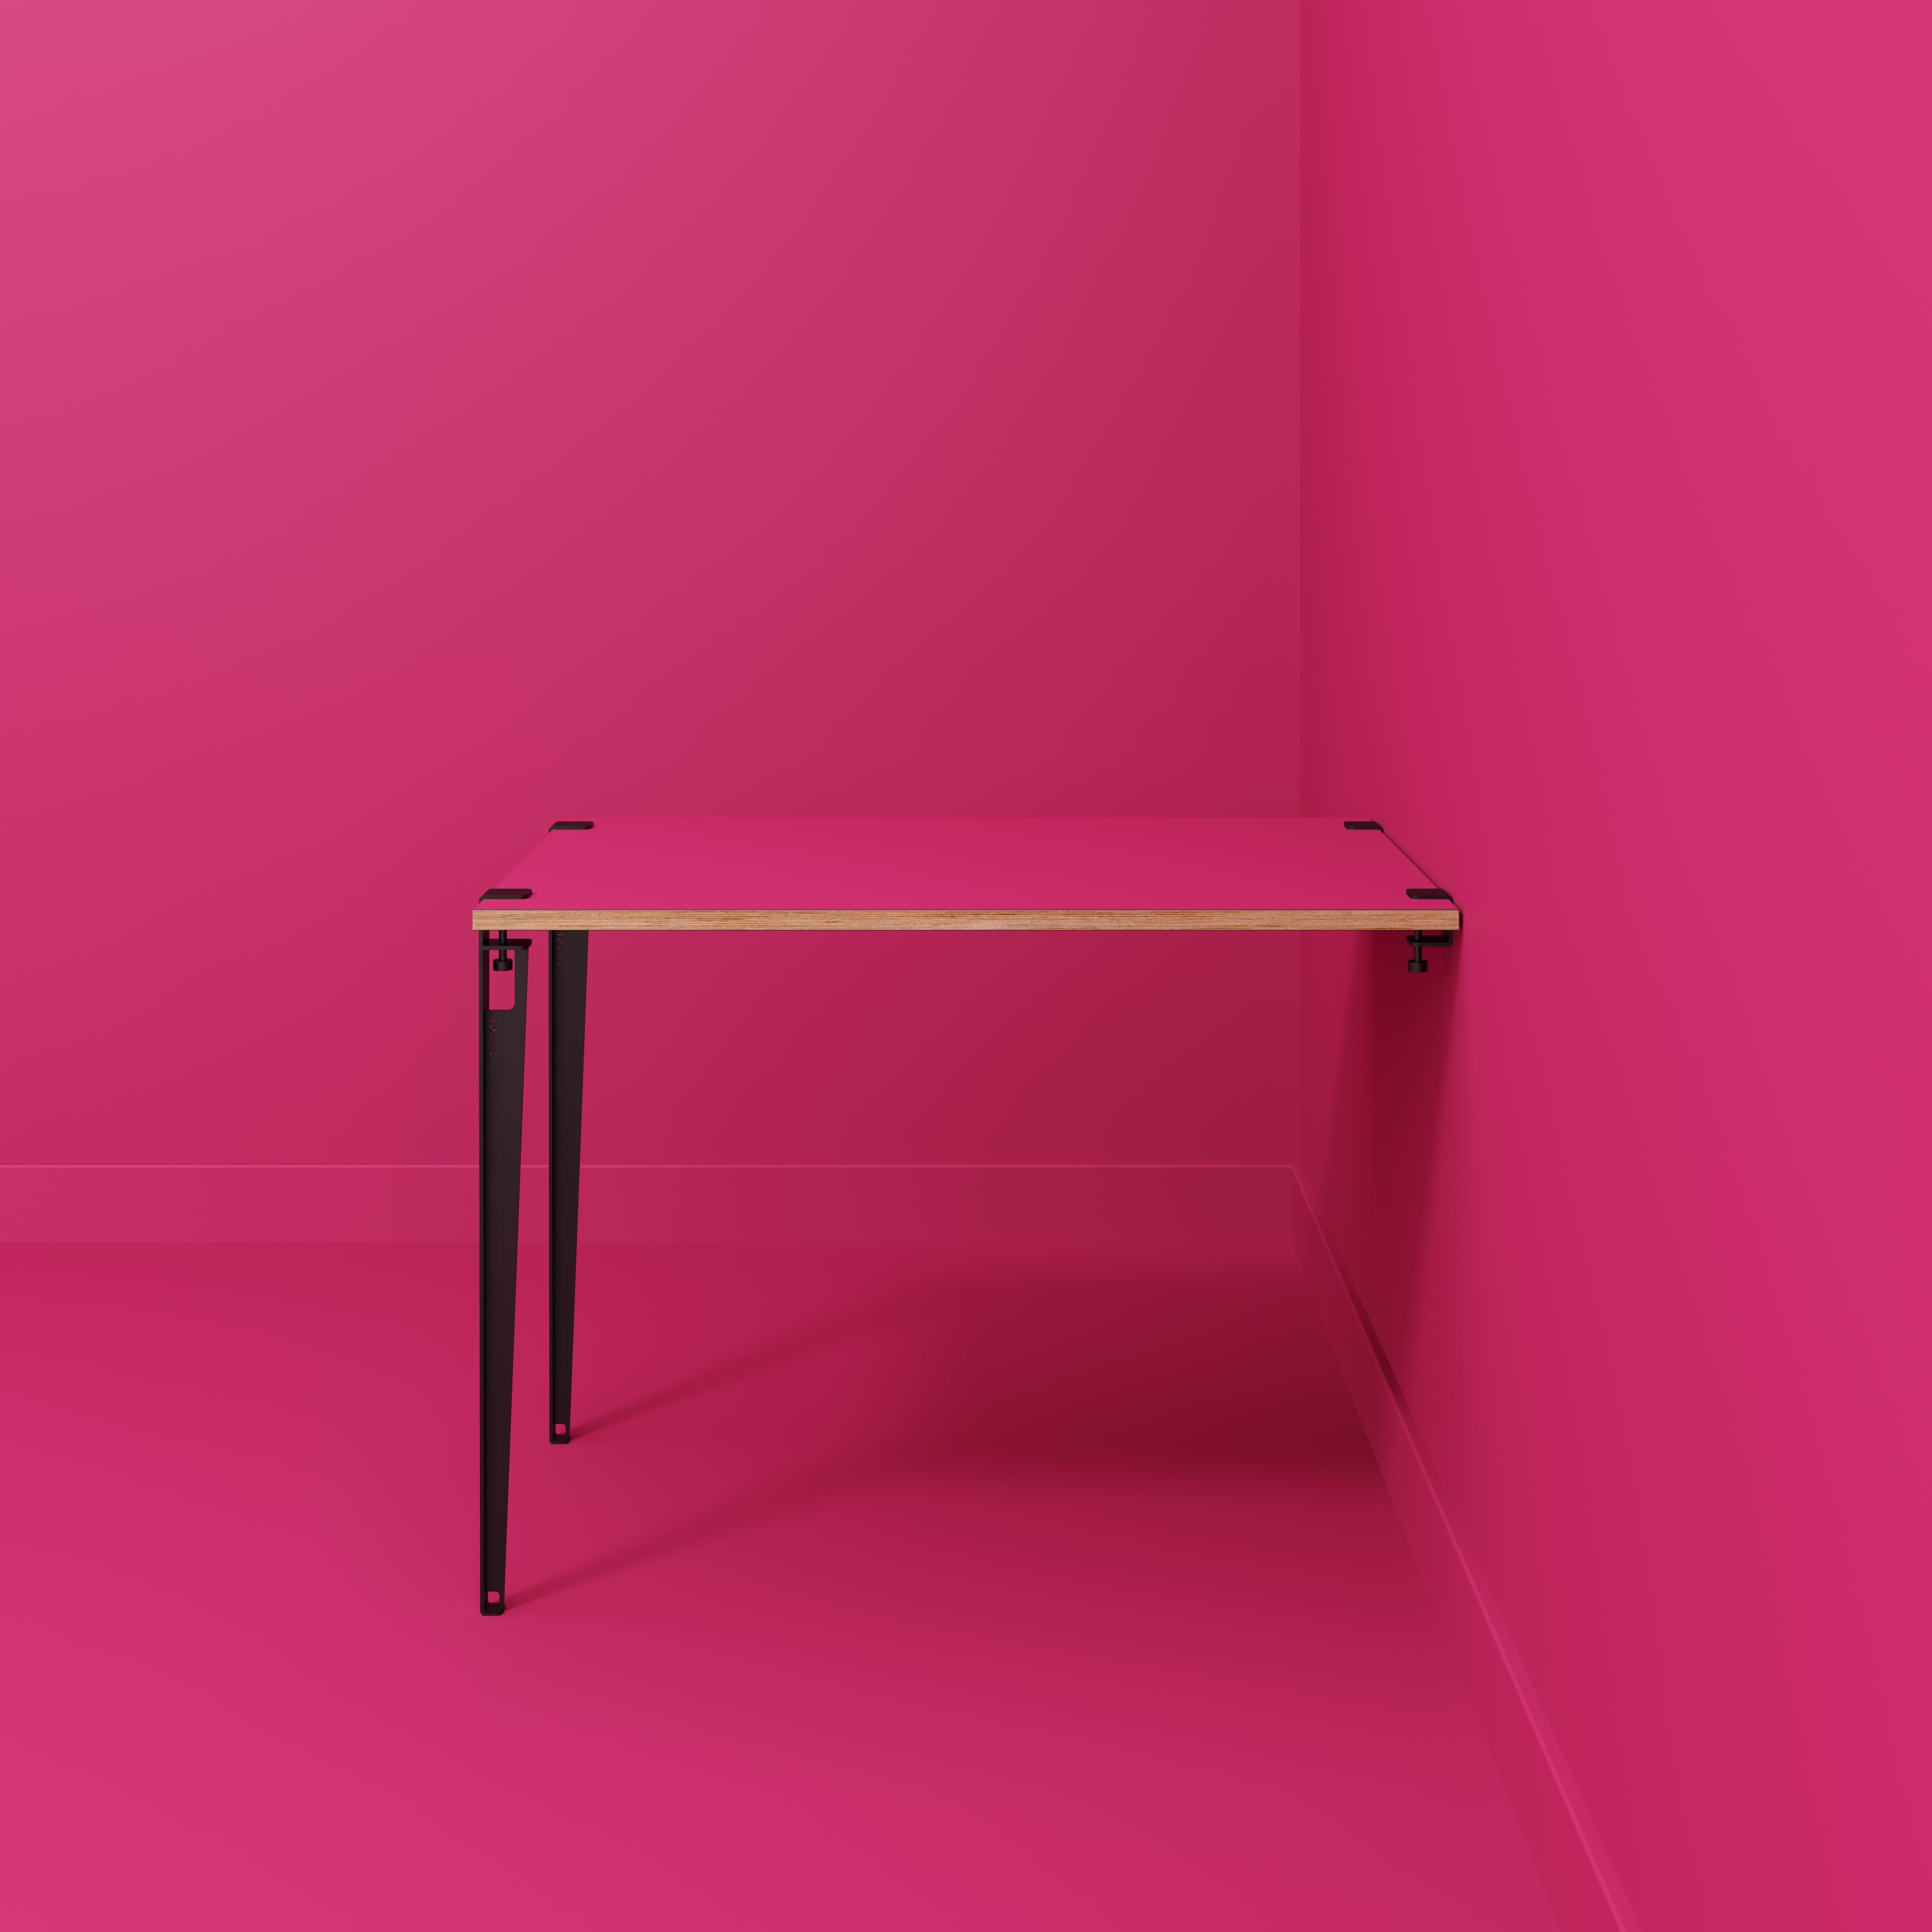 Wall Table with Black Tiptoe Legs and Brackets - Formica Juicy Pink - 1200(w) x 800(d) x 900(h)